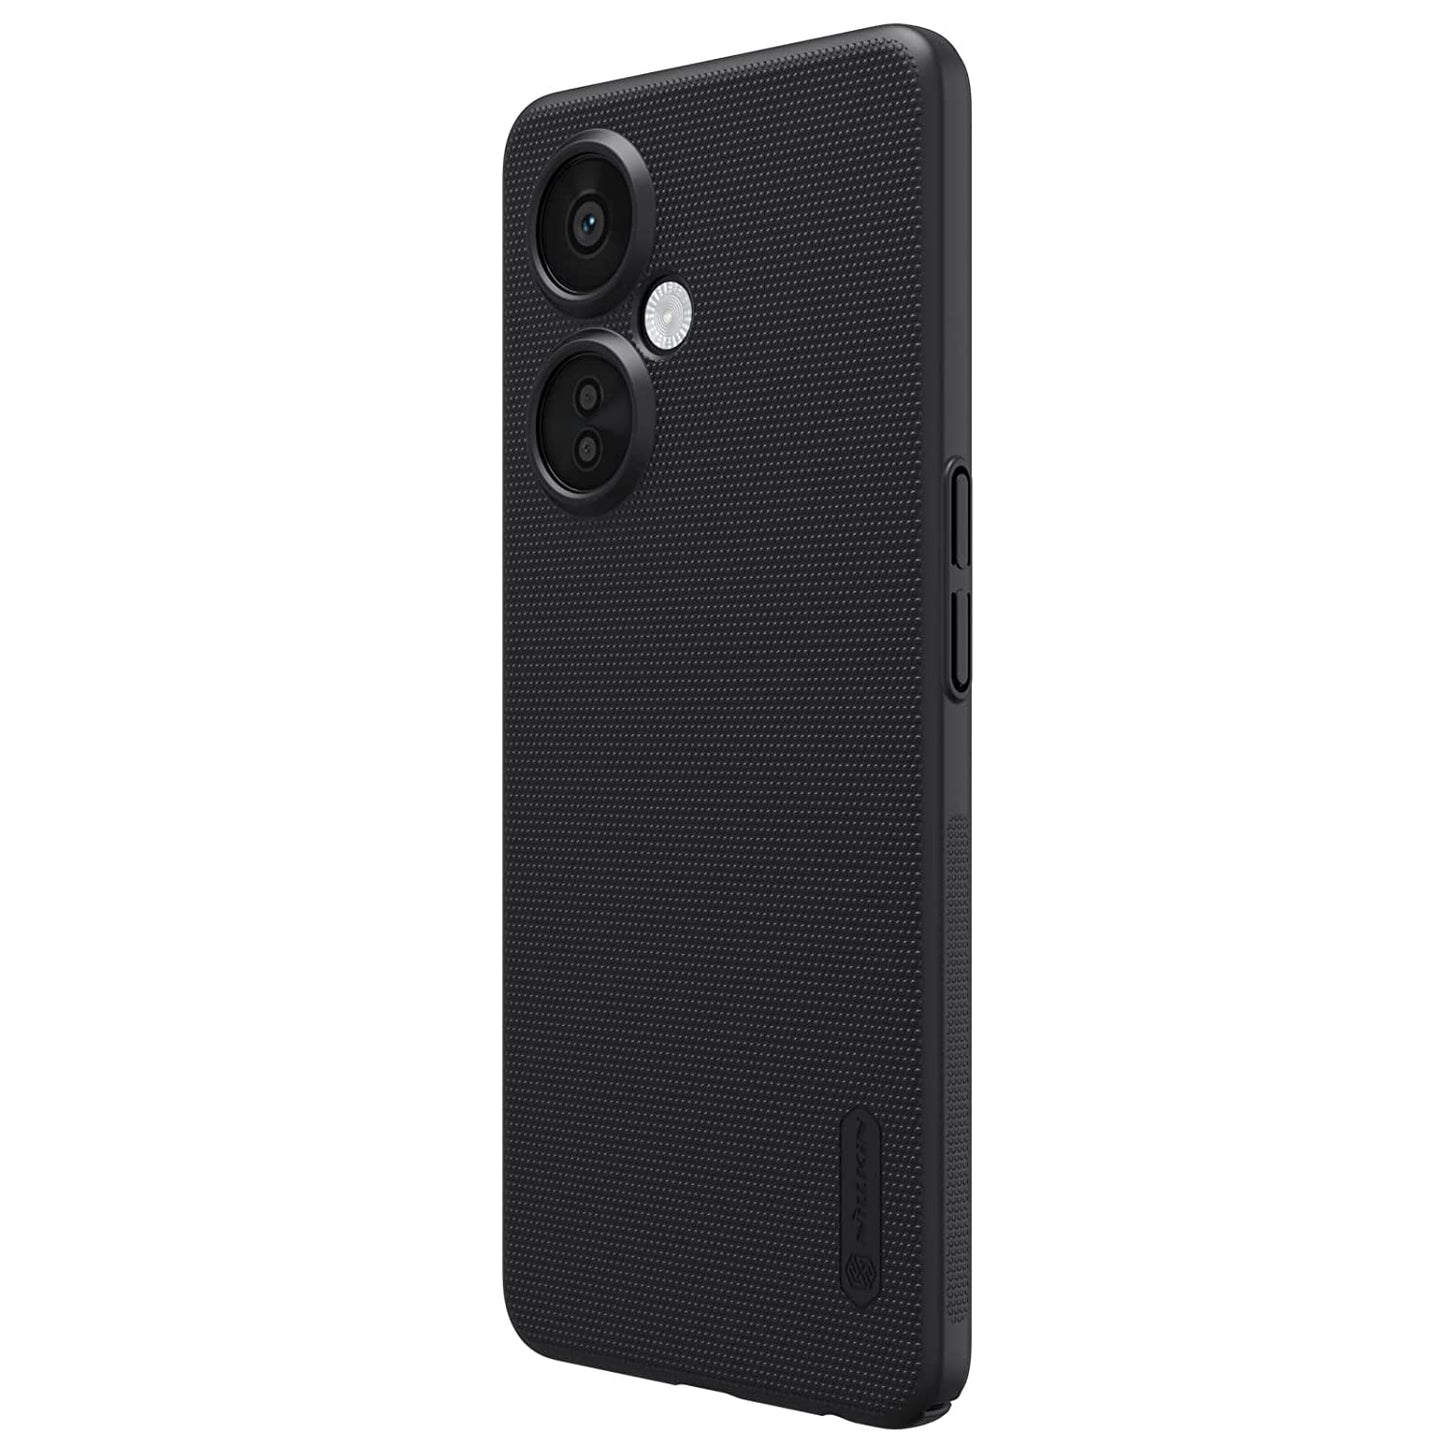 Nillkin Case for Oneplus Nord CE 3 Lite 5G (6.72" Inch) Super Frosted Hard Back Dotted Grip Cover PC Black Color